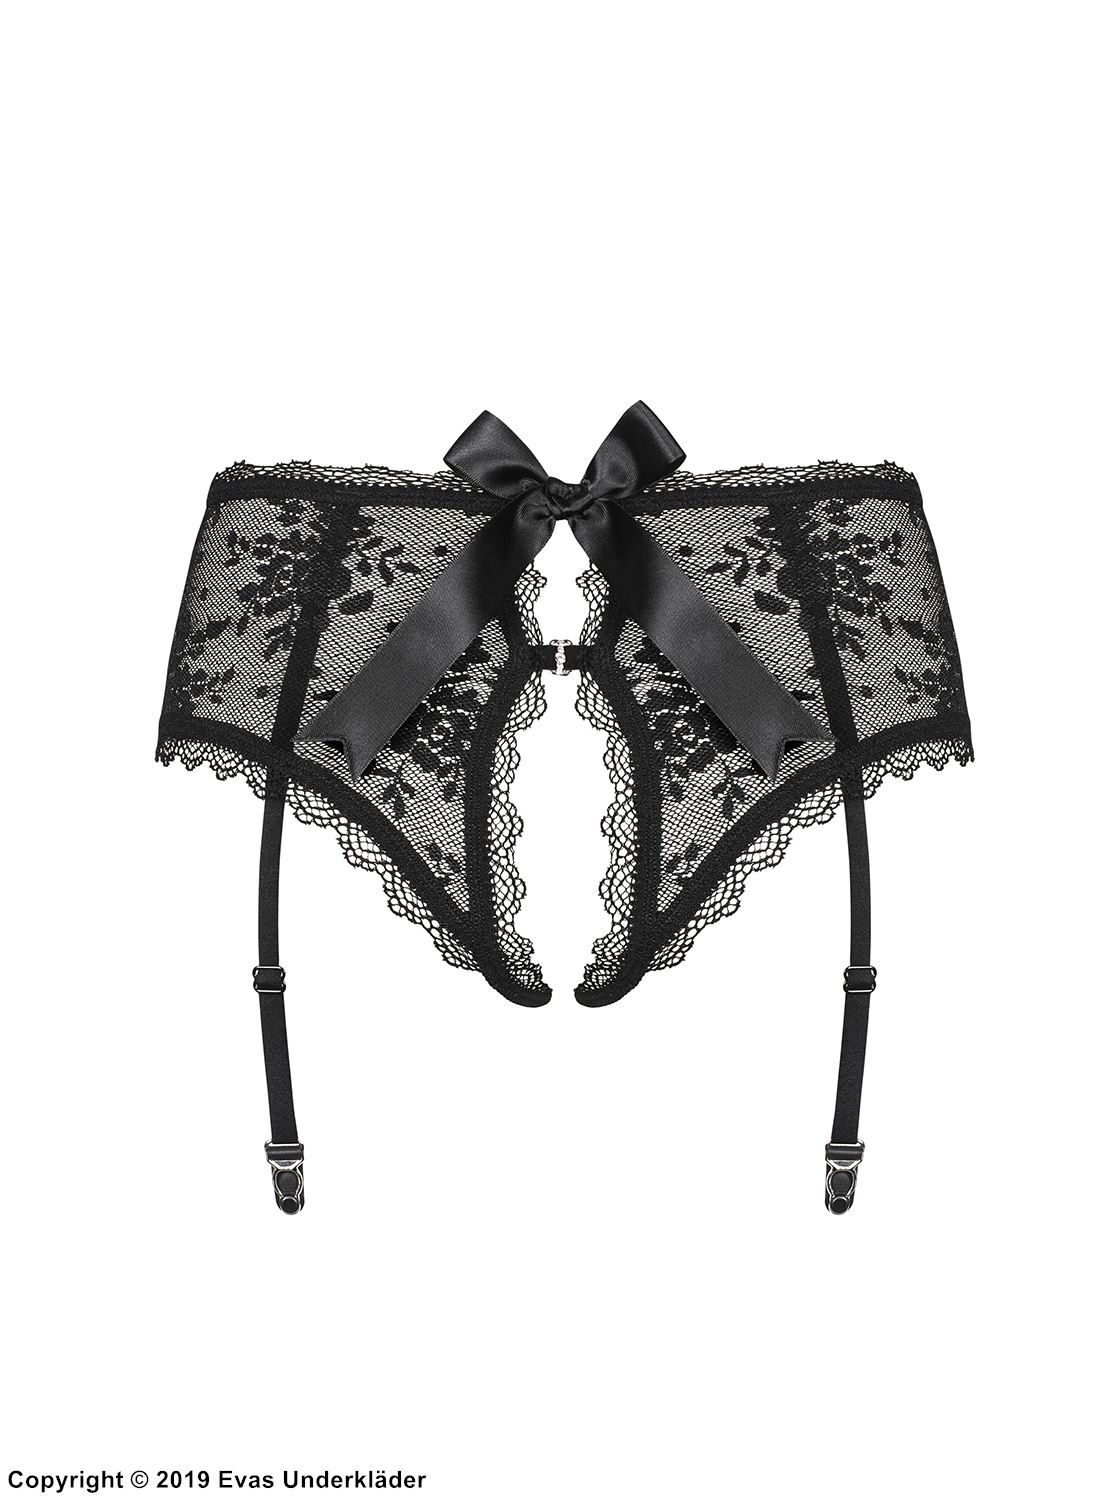 Garter belt and panty, big bow, open crotch, floral lace